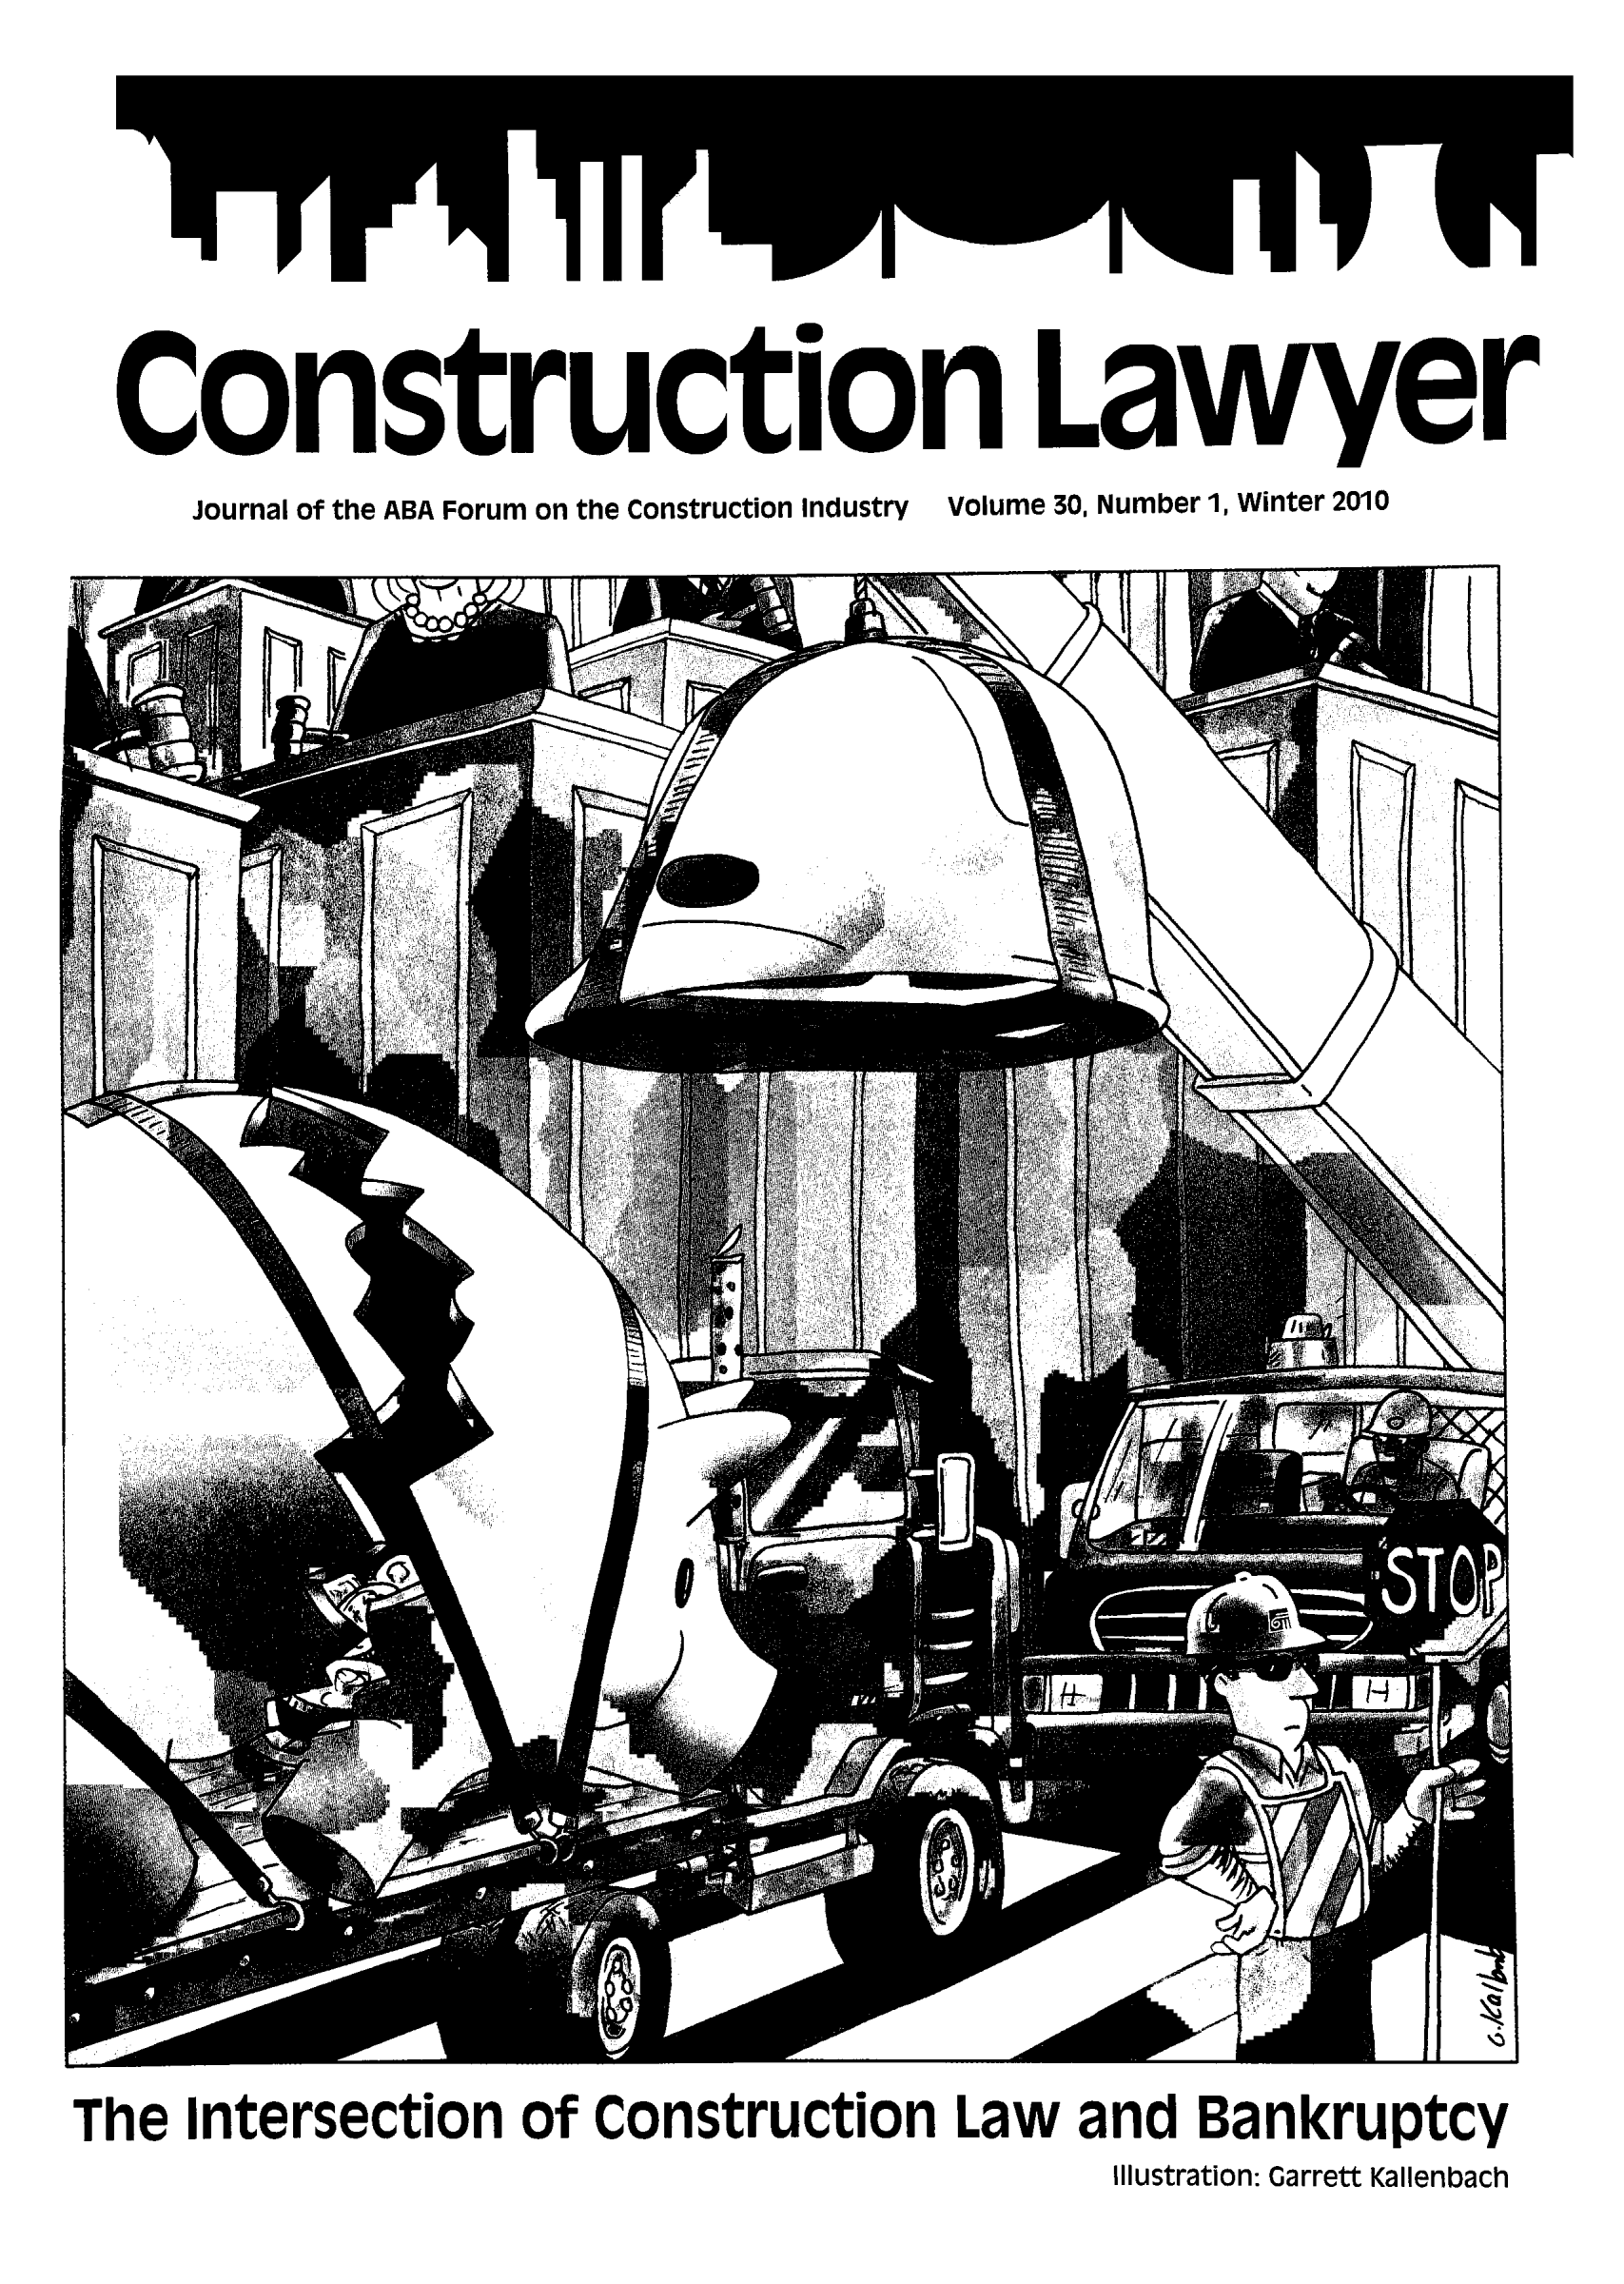 handle is hein.journals/conlaw30 and id is 1 raw text is: construct ion iaver
Journal of the ABA Forum on the Construction Industry Volume 30, Number 1, Winter 2010

t                  q,
The Intersection of Construction Law and Bankruptcy
Illustration: Garrett Kallenbach


